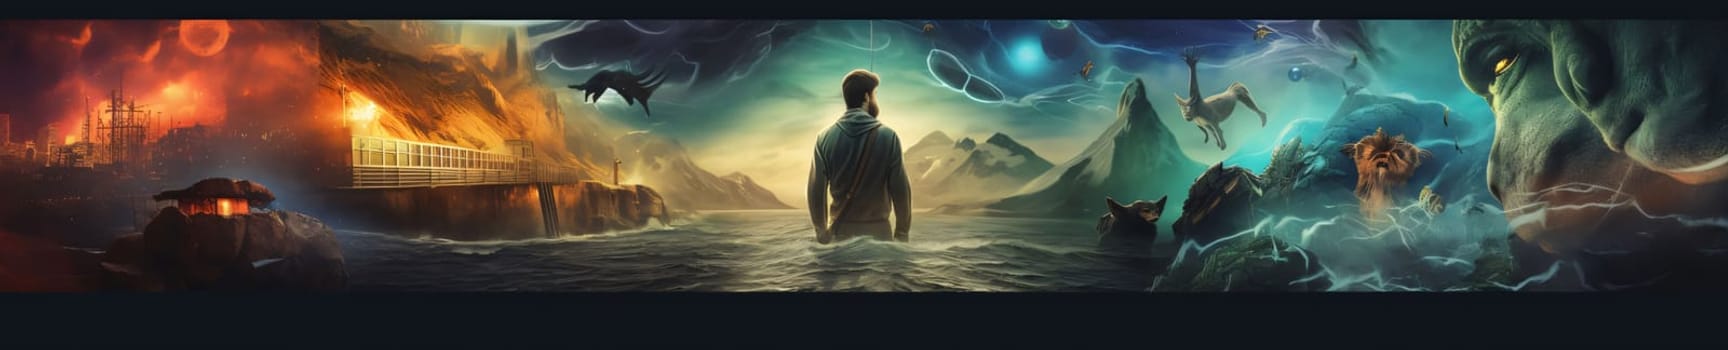 Banner: Surreal scene with man in the sea. 3D rendering.